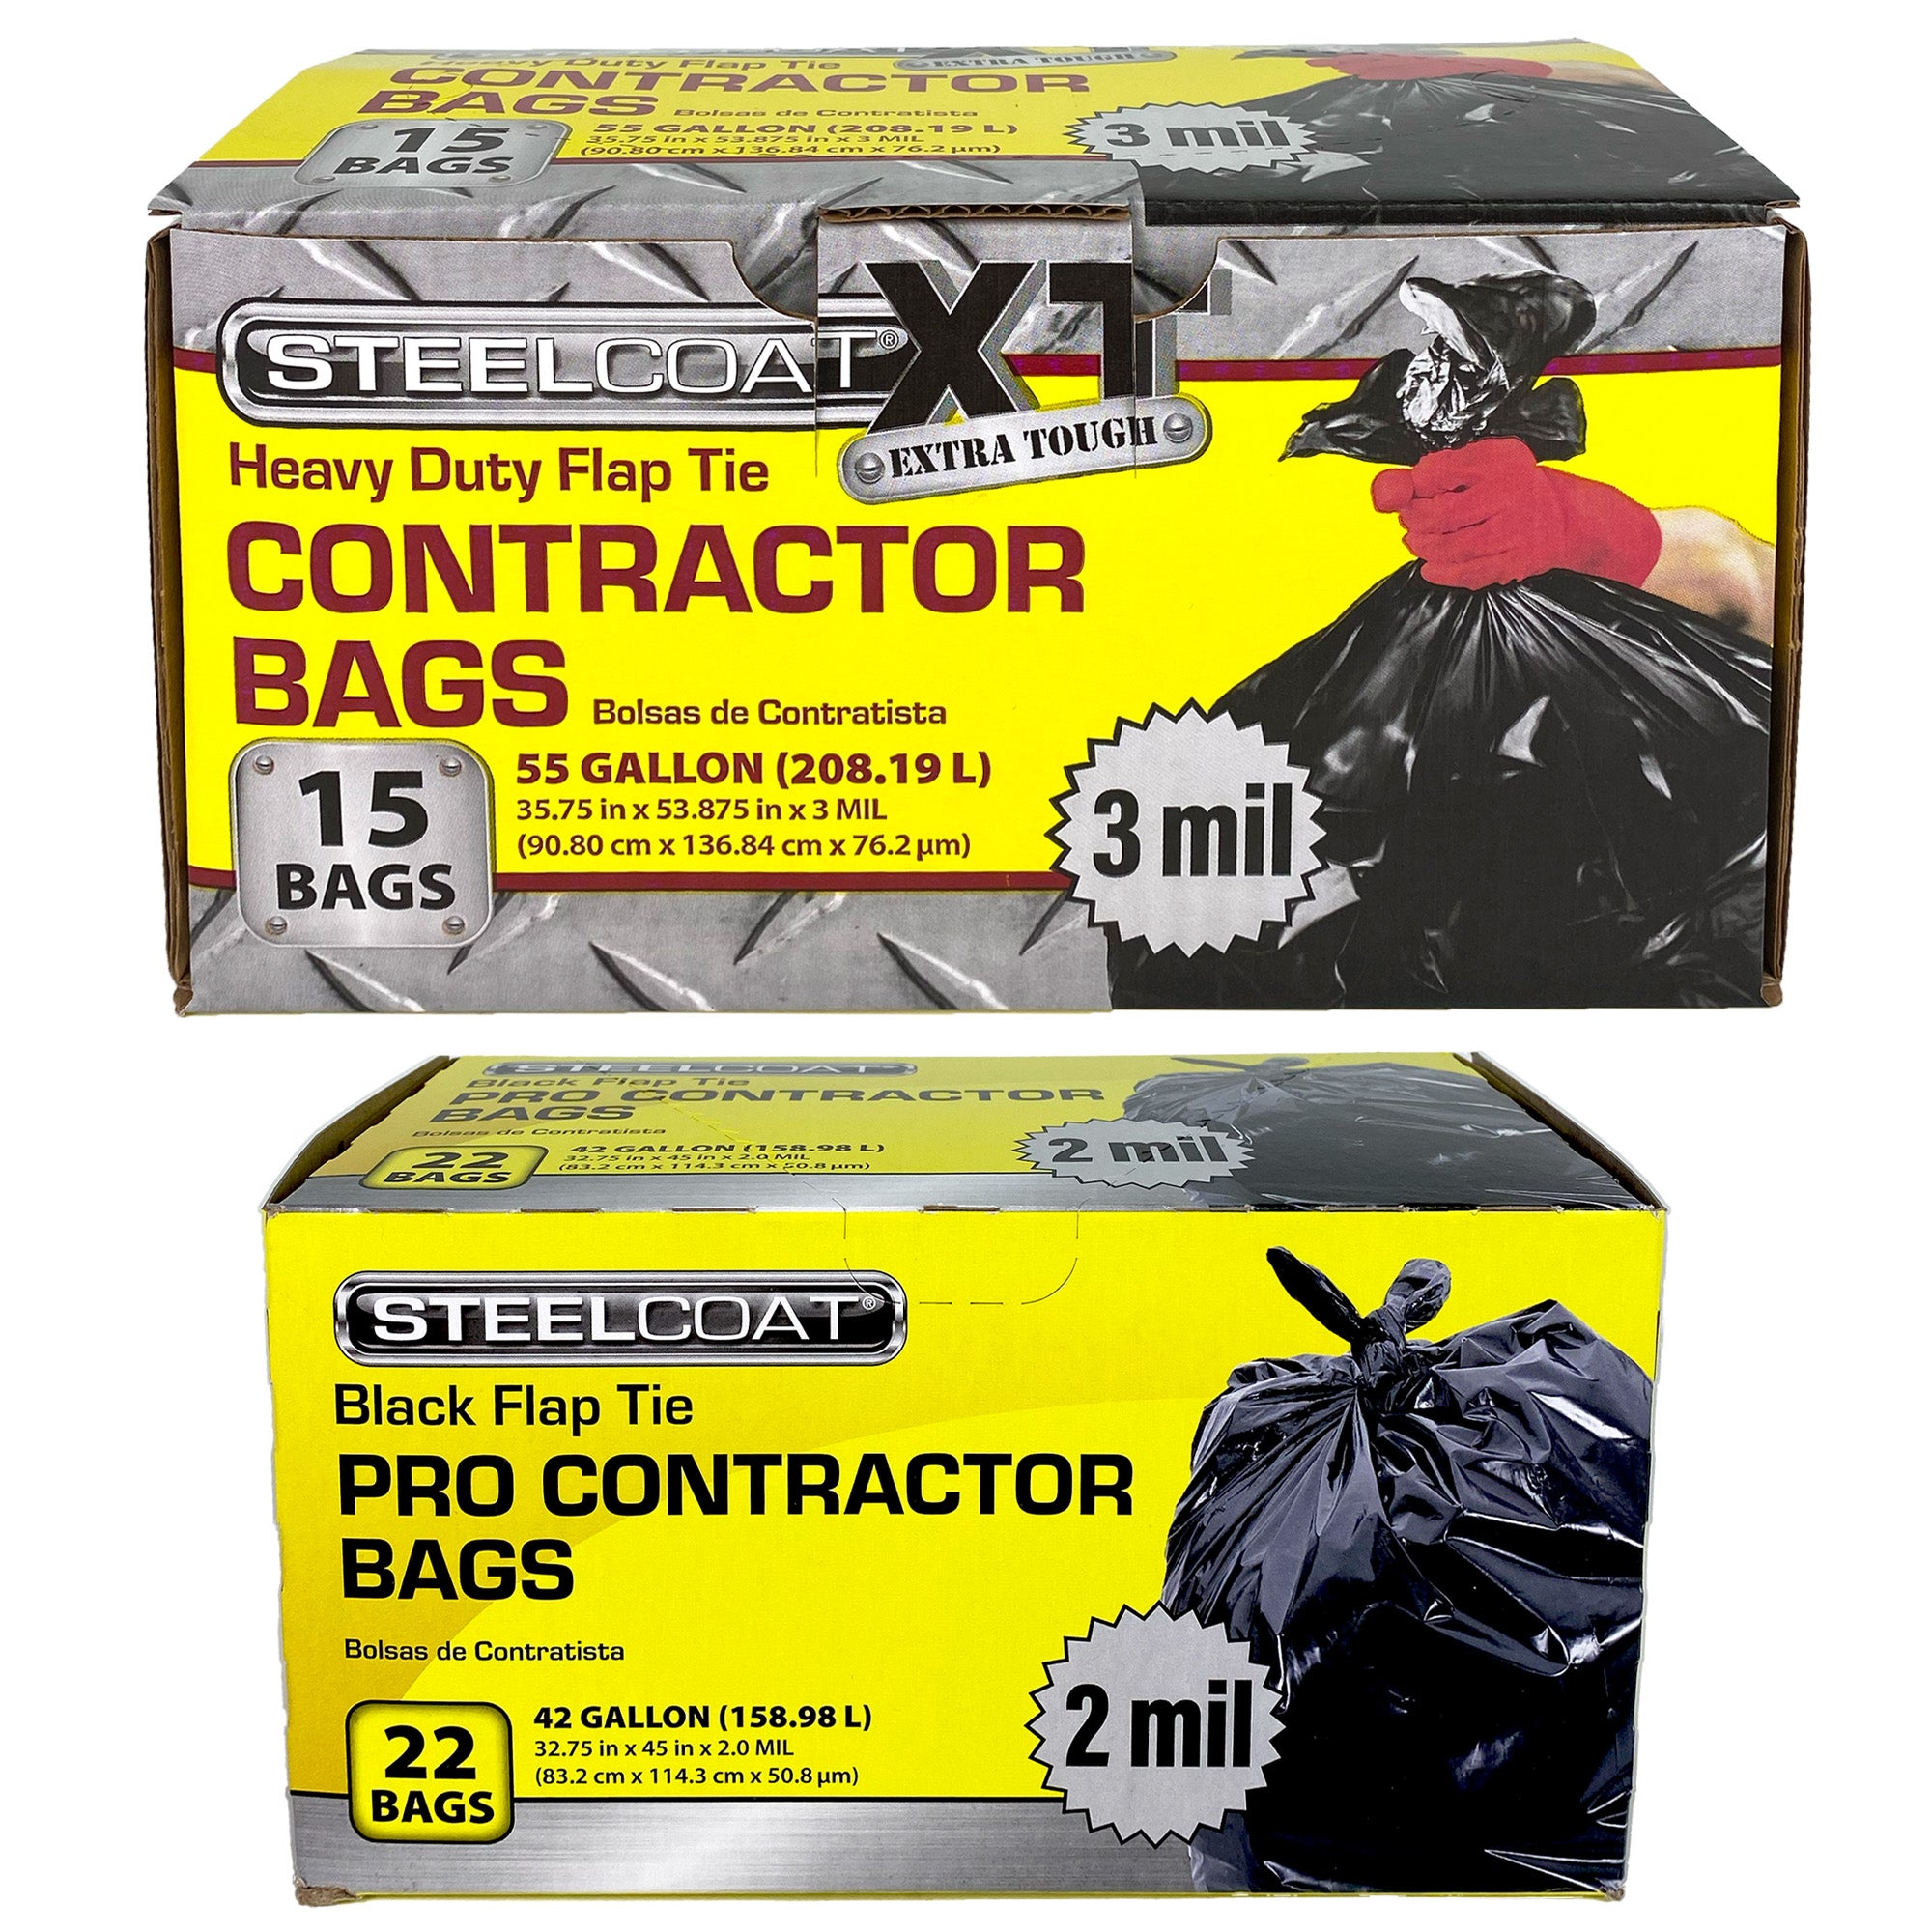 PROGRADE HD 3 MIL CONTRACTOR BAGS 42 GAL 20 PC - Coastal Construction  Products